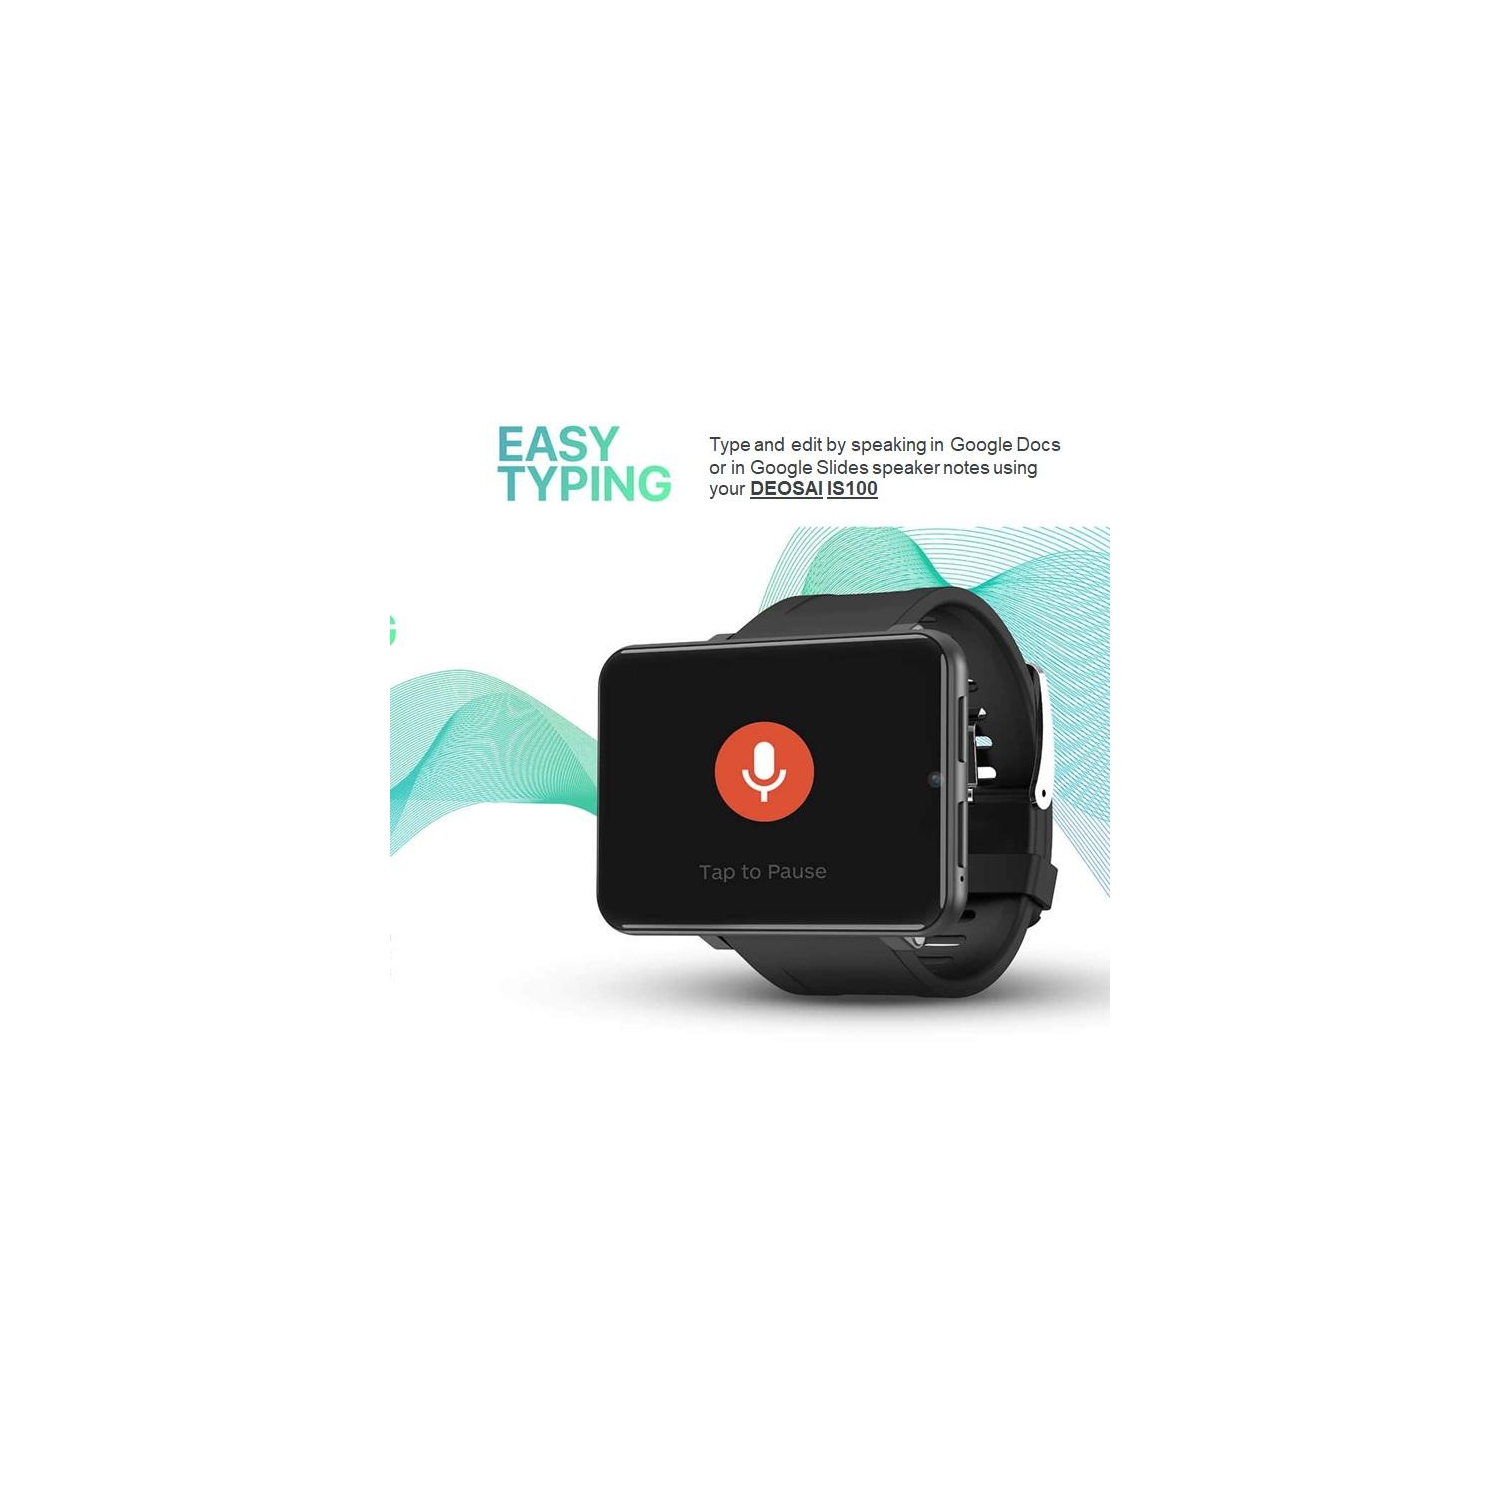 ISPEKTRUM iS100 4G Smartwatch 2.8” Screen 4G LTE Call, WiFi, 5MP Camera, Long Battery Life, GPS, Google Maps & Play Store, 3GB+32GB, HR Monitor Multiple Sports Mode Waterproof